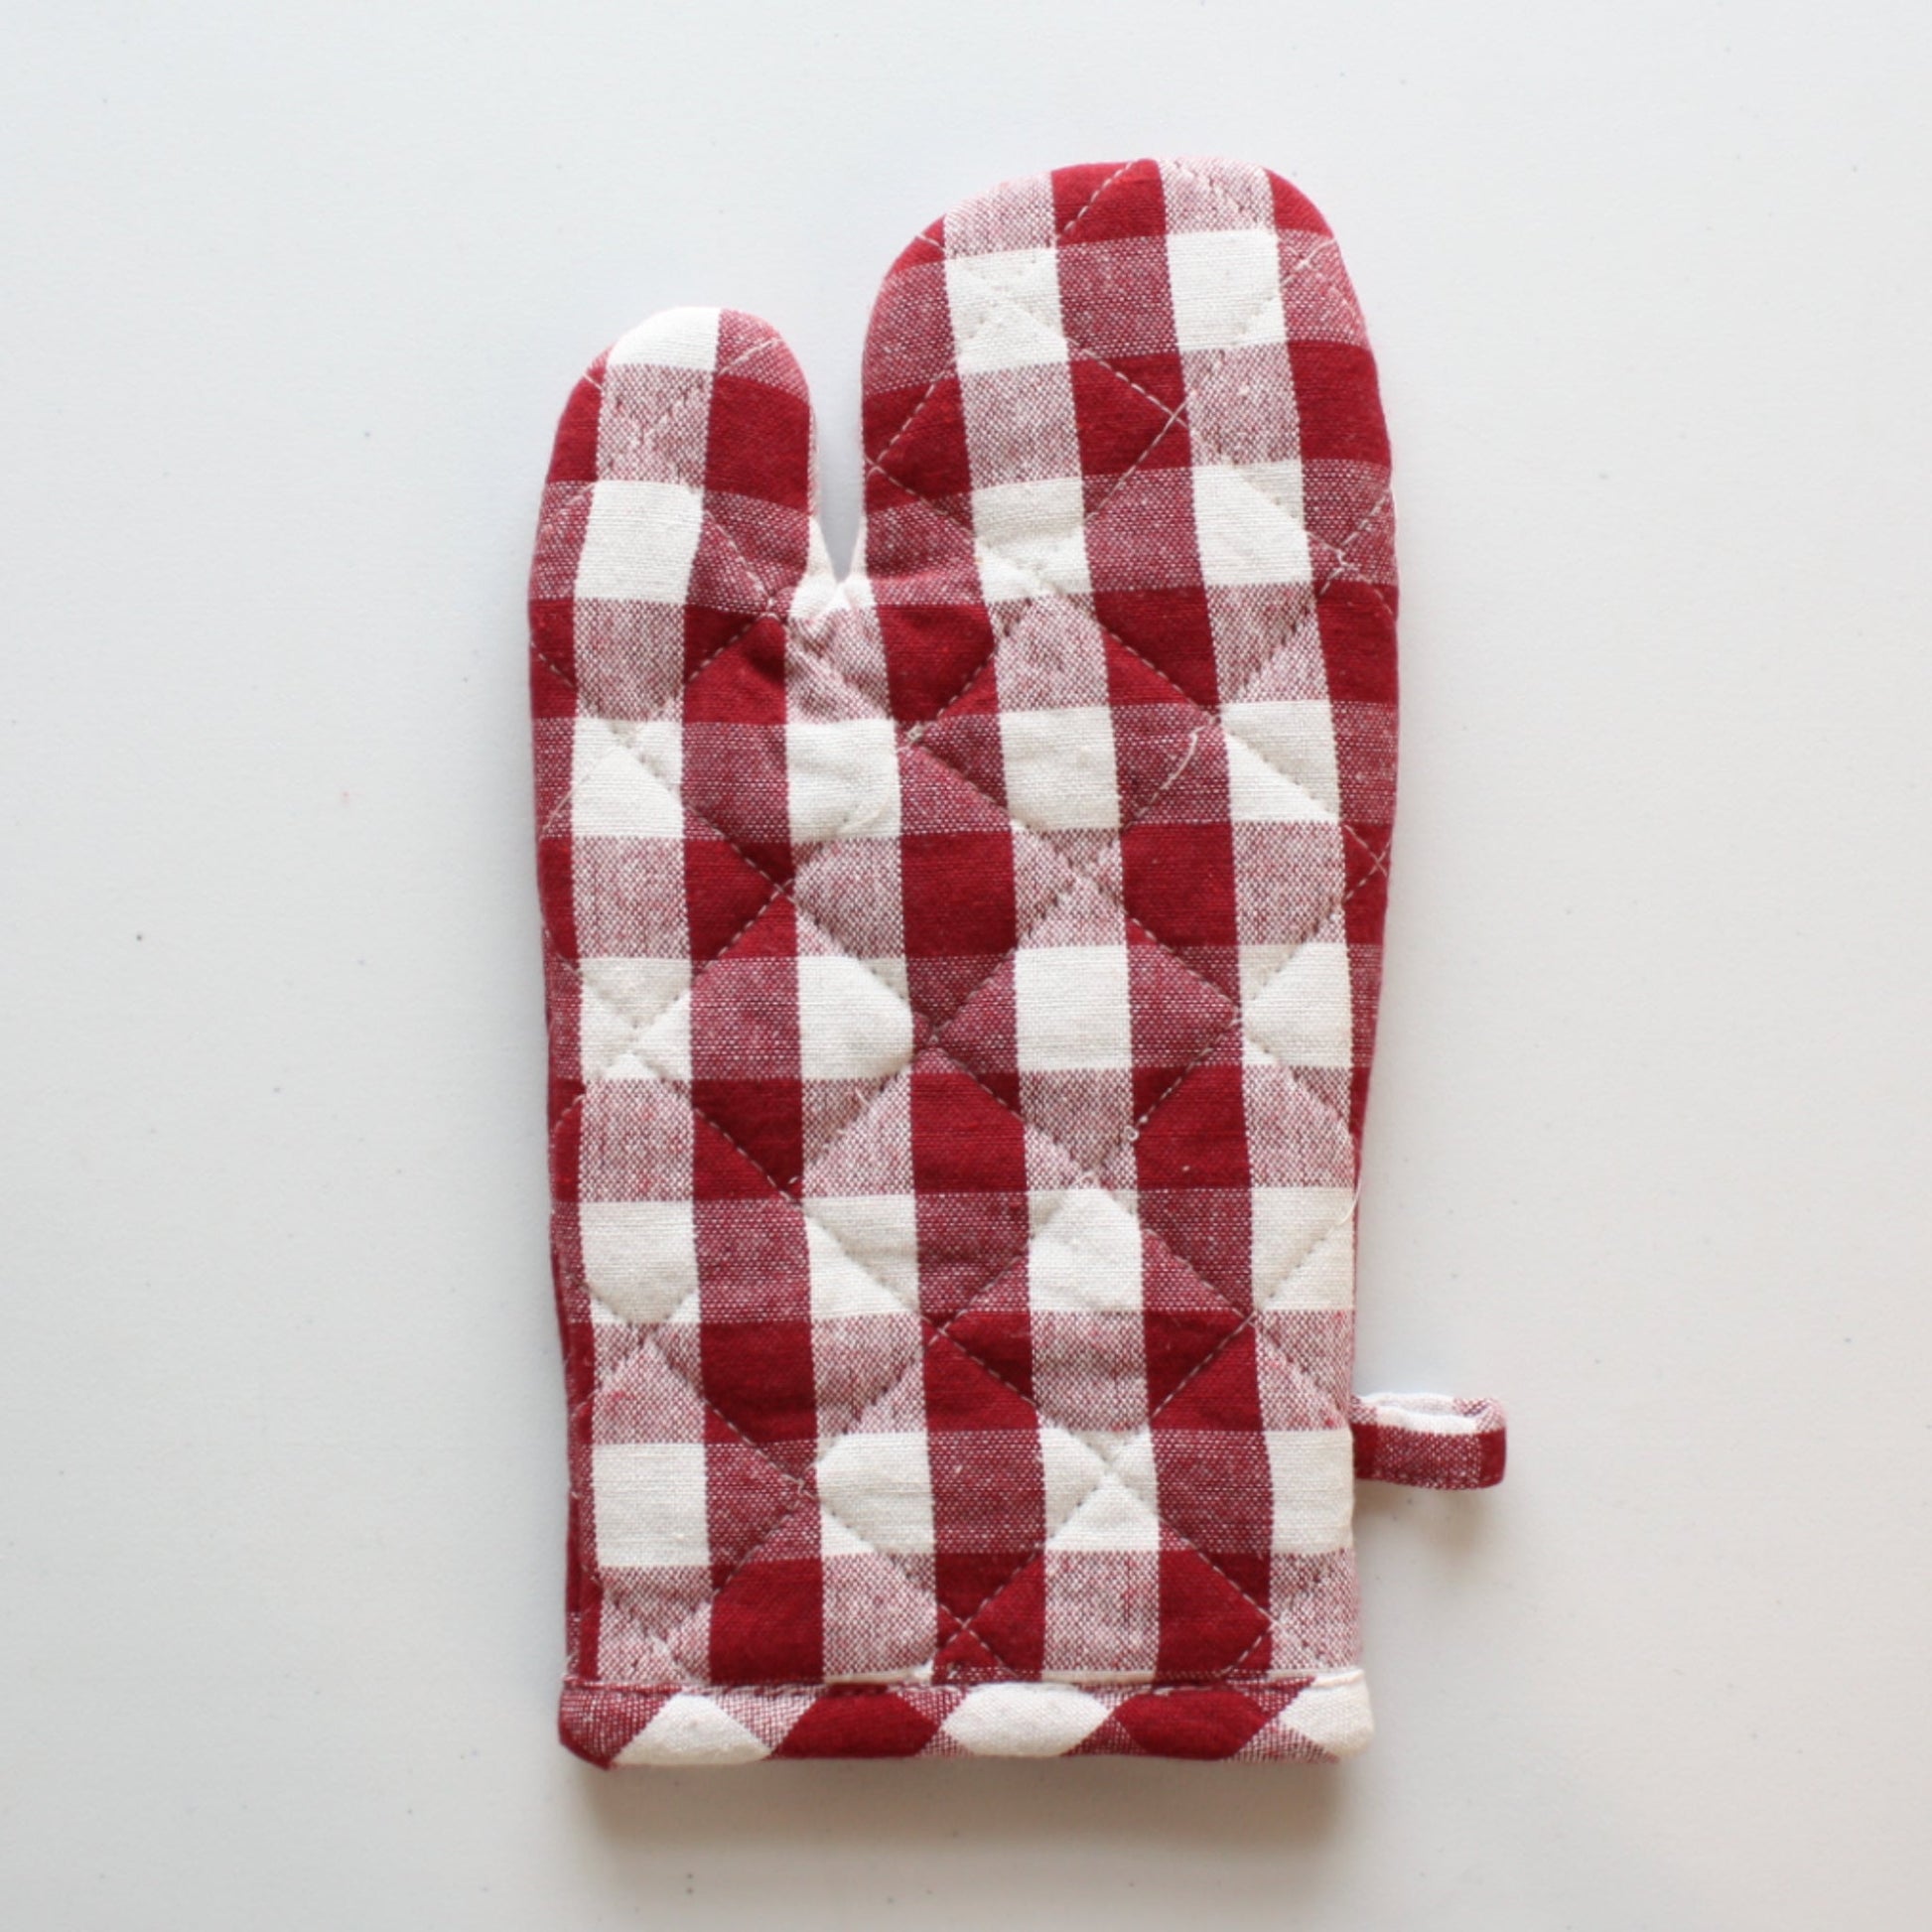 Buffalo Check Oven Mitts - Made in the USA